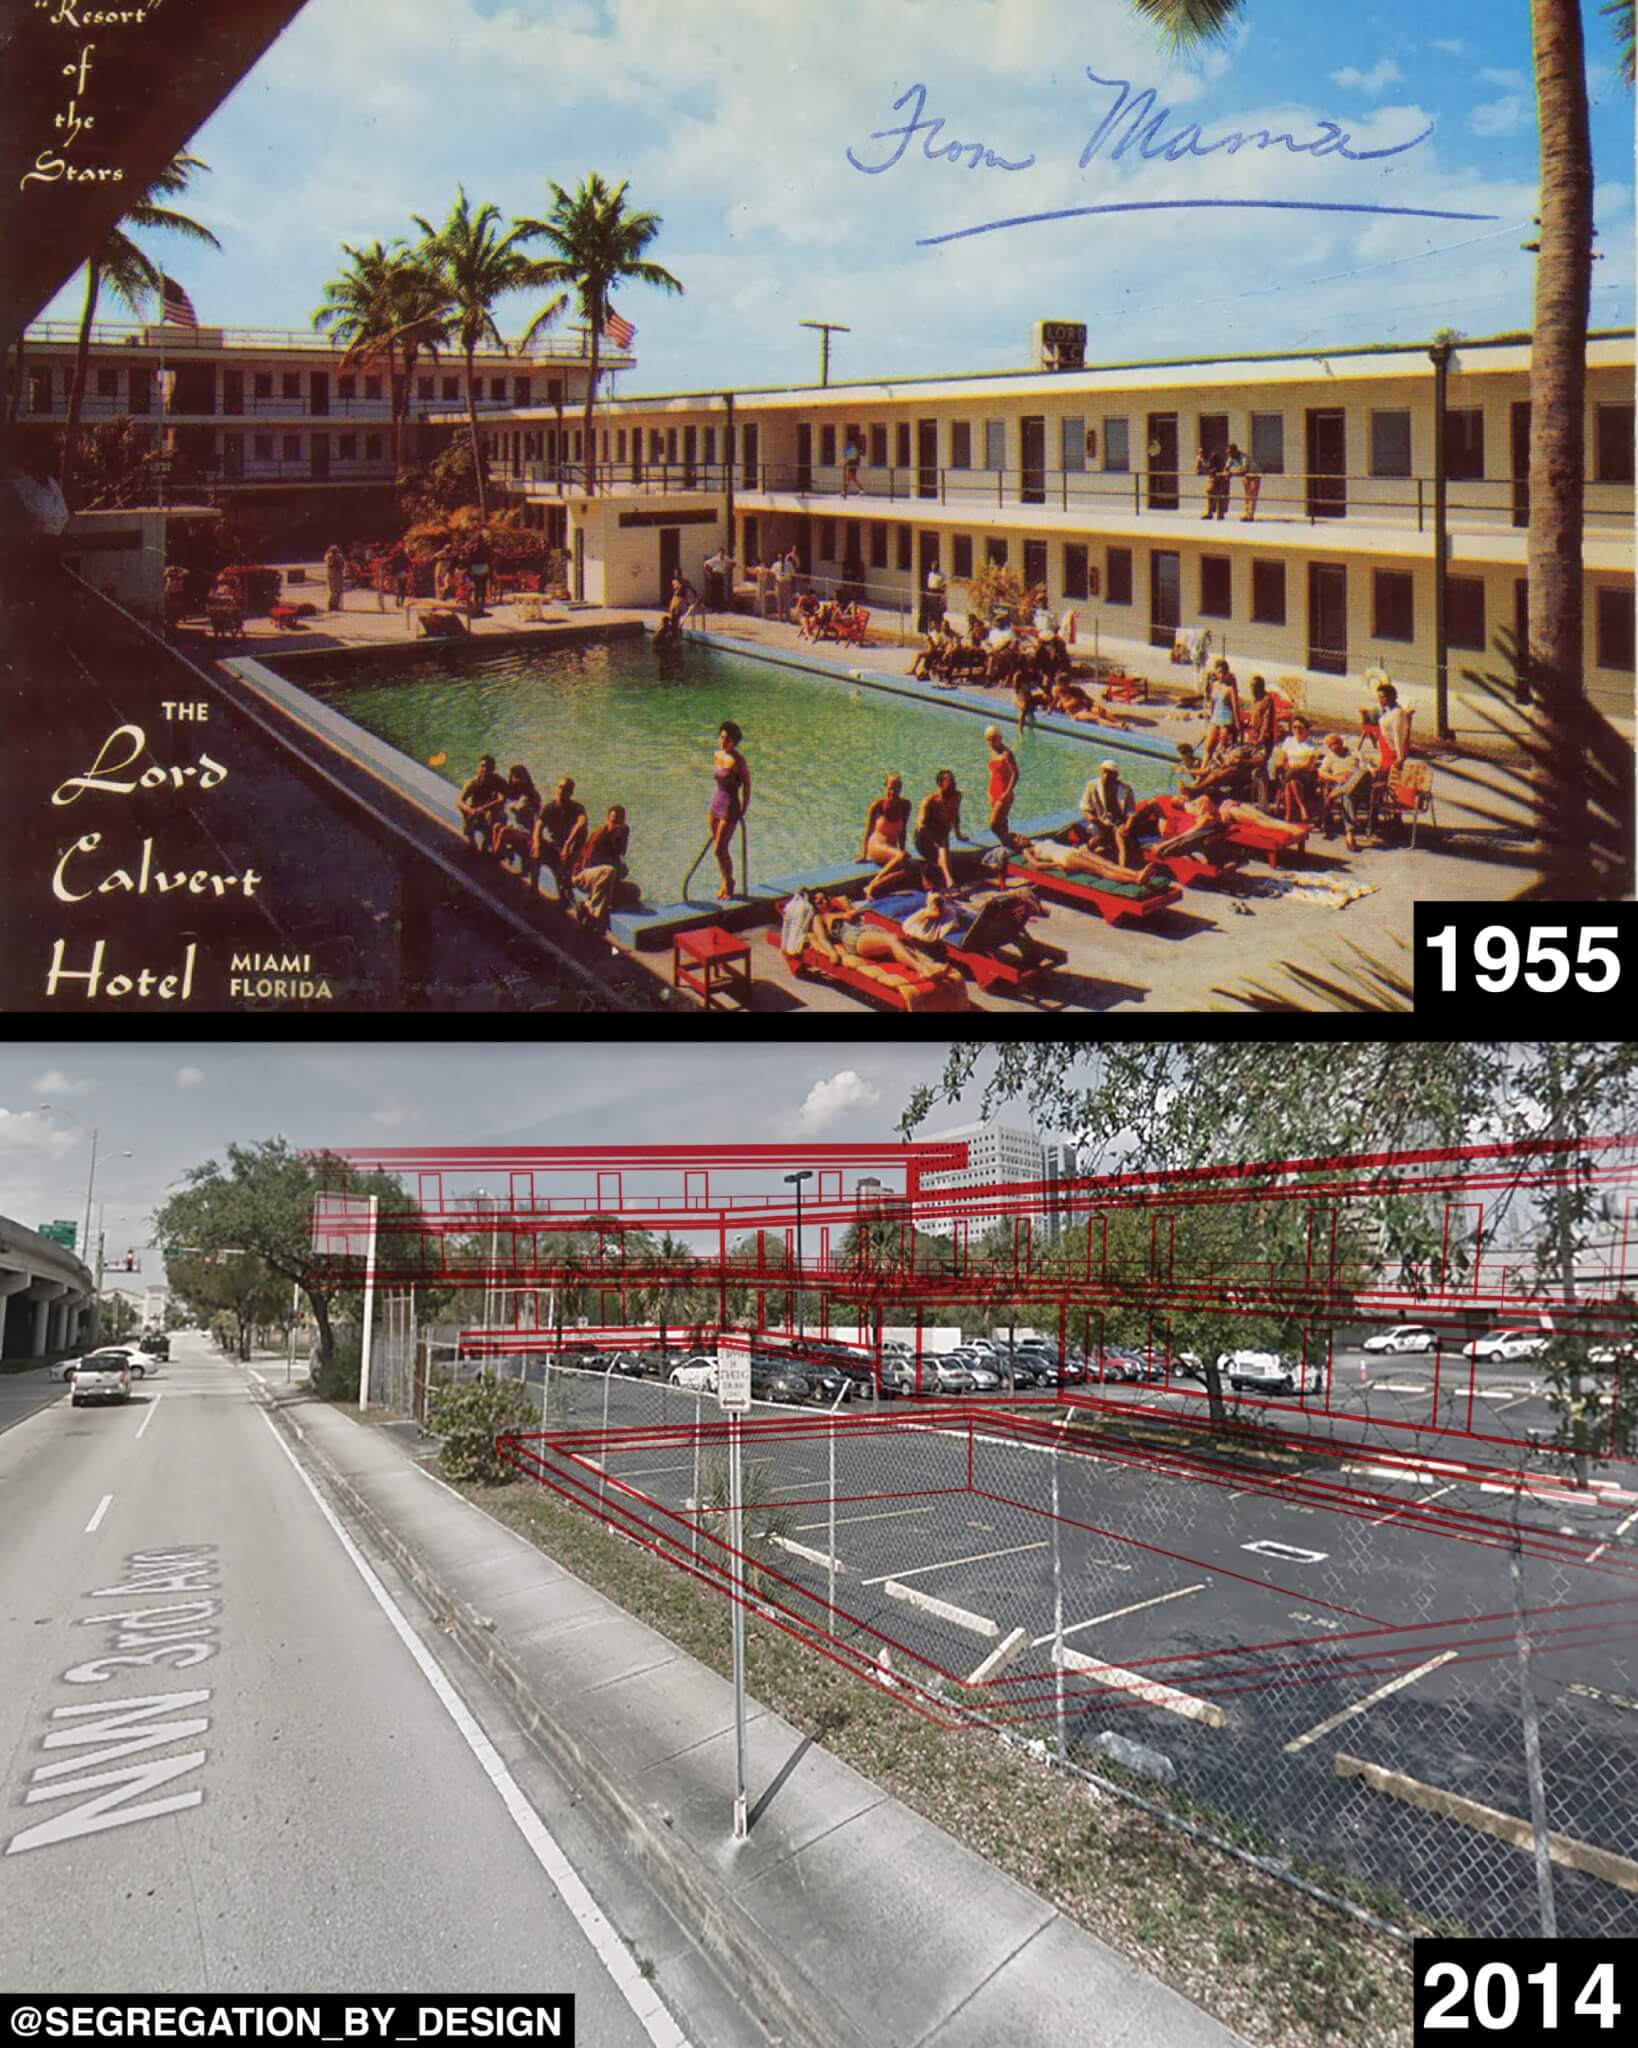 a postcard showing a vibrant scene at a miami hotel contrasted with a surface parking lot now at the site